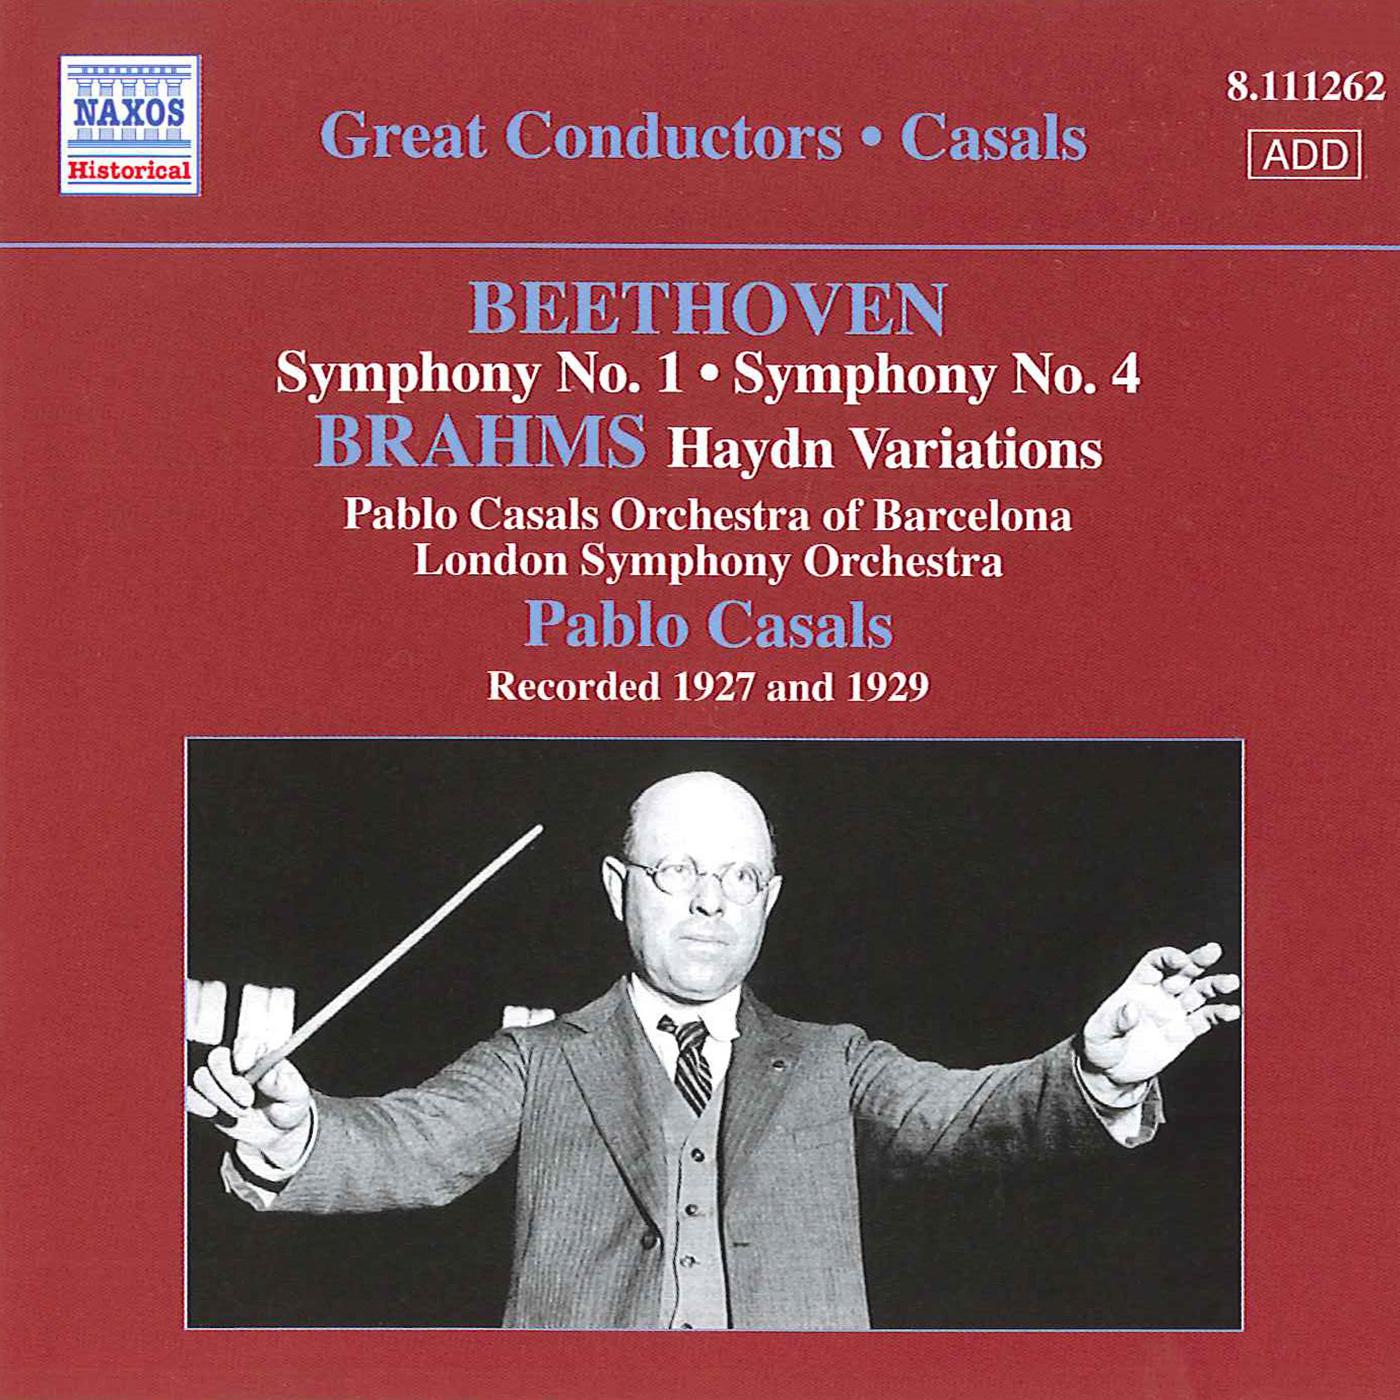 Variations on a Theme by Haydn, Op. 56a, "St. Anthony Variations": Variation 8: Presto non troppo